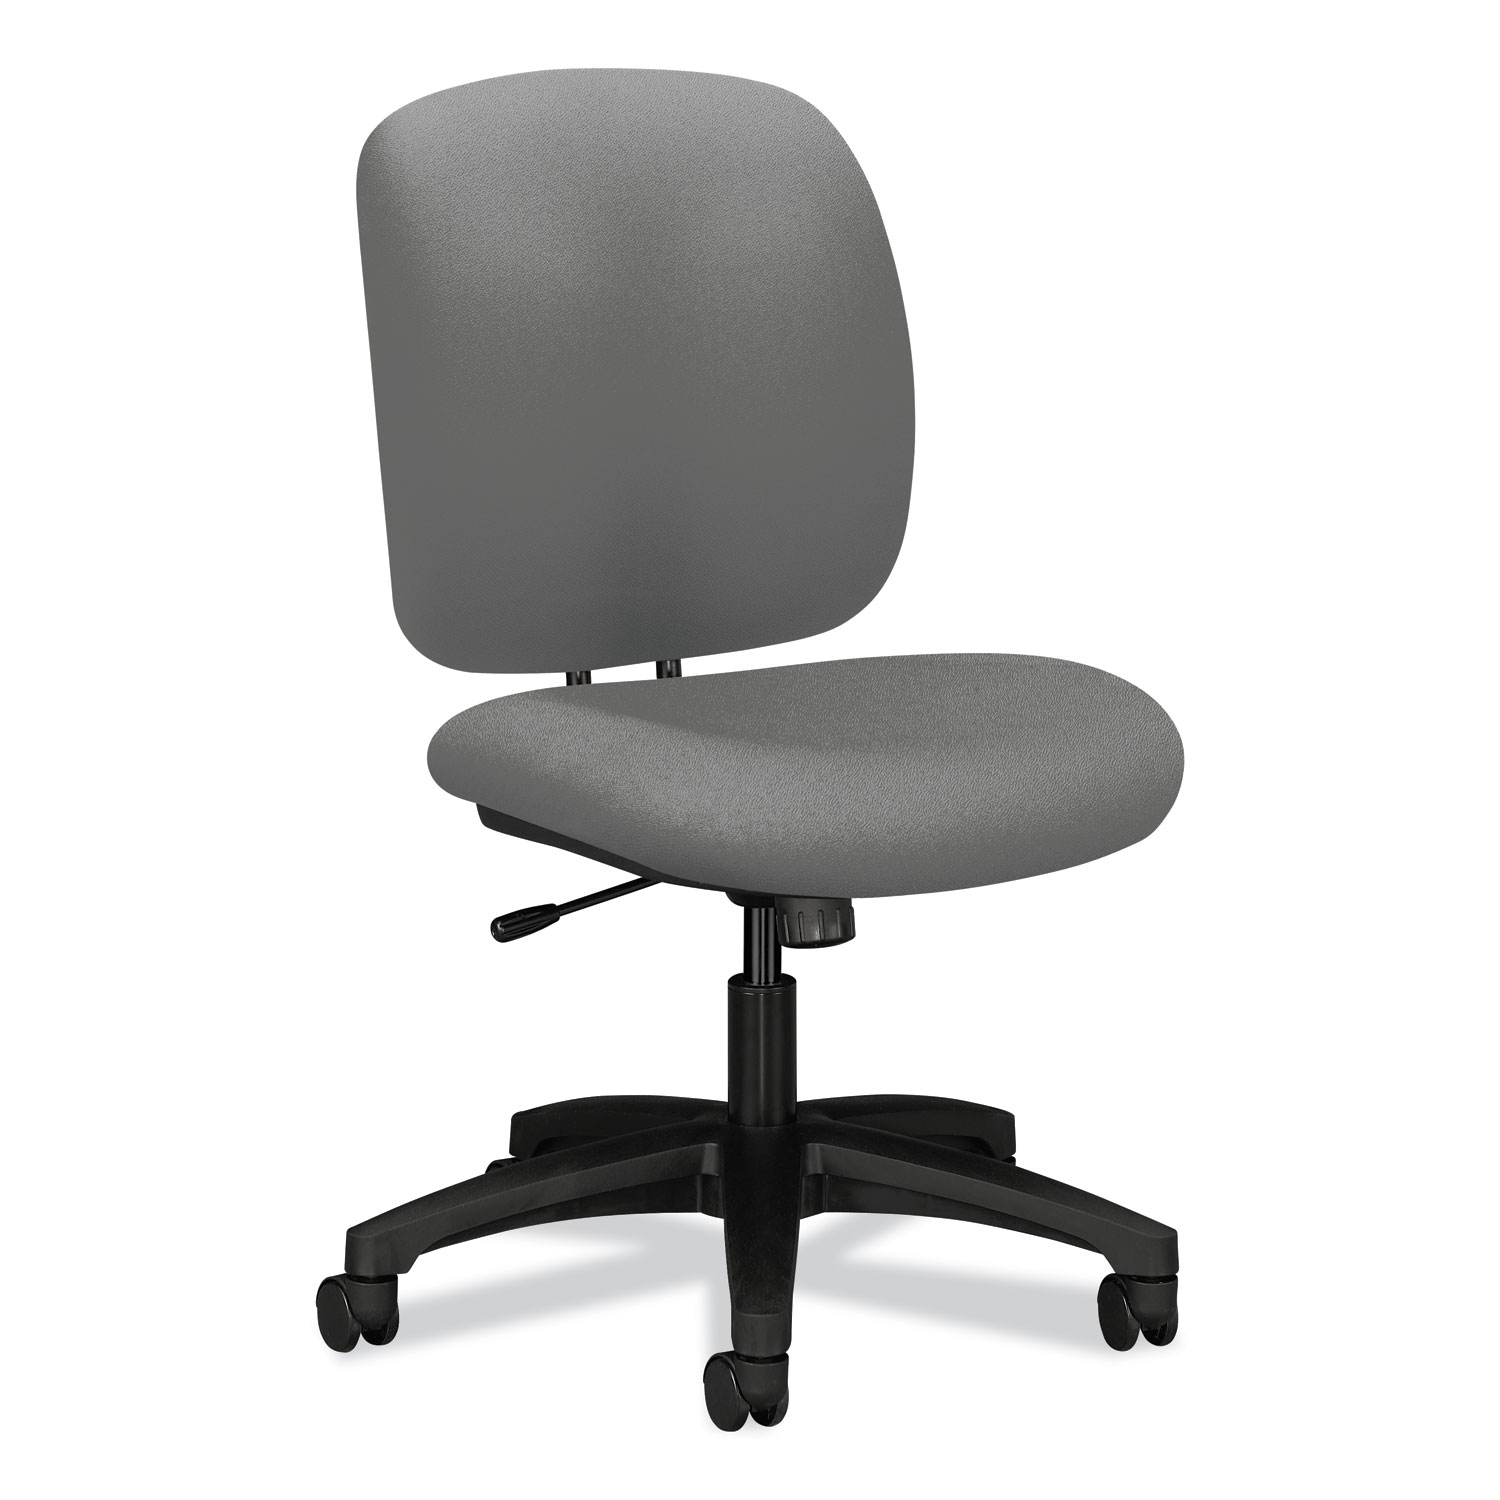  HON HON5902CU22T ComforTask Task Chair with Tilt Lock/Tilt Tension, Supports up to 300 lbs, Frost Seat, Frost Back, Black Base (HON5902CU22T) 